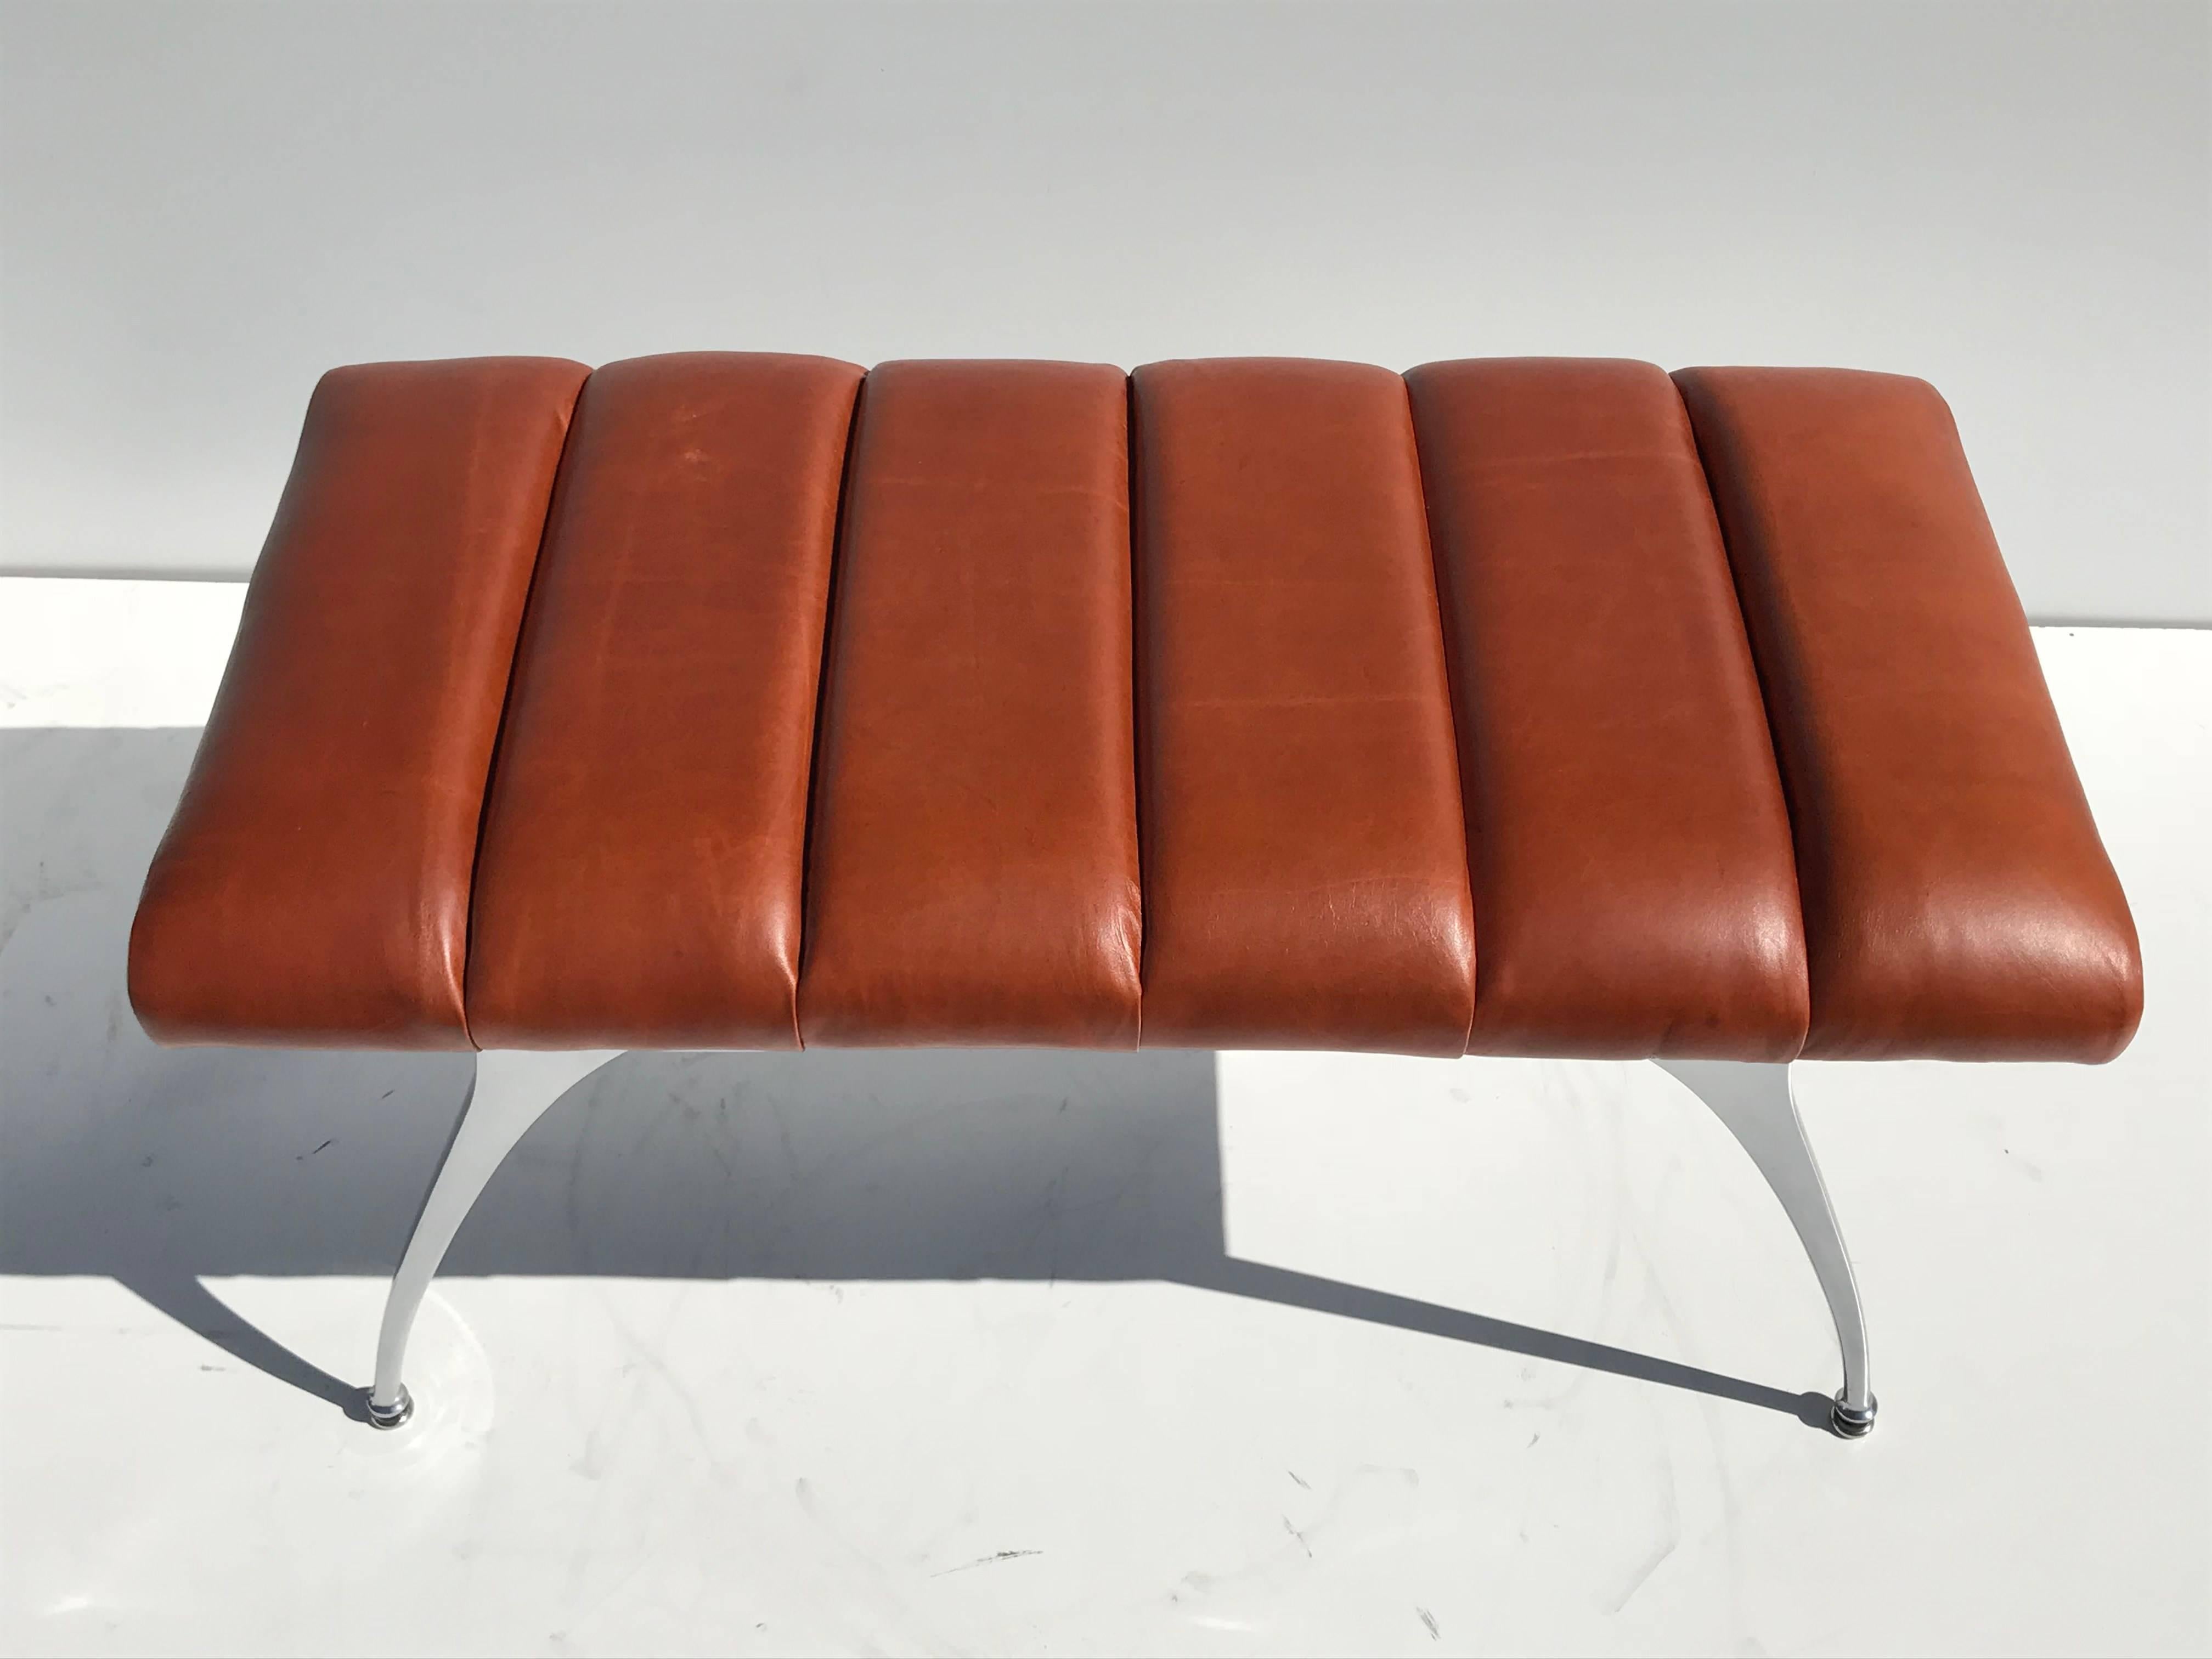 Modernist aluminum bench in channel tufted vintage cognac leather.
Legs are vintage from 1960's
Upholstery is brand new with vintage leather.
1stDibs offers flat rate shipping for $369 but we can ship it by UPS Ground for $225